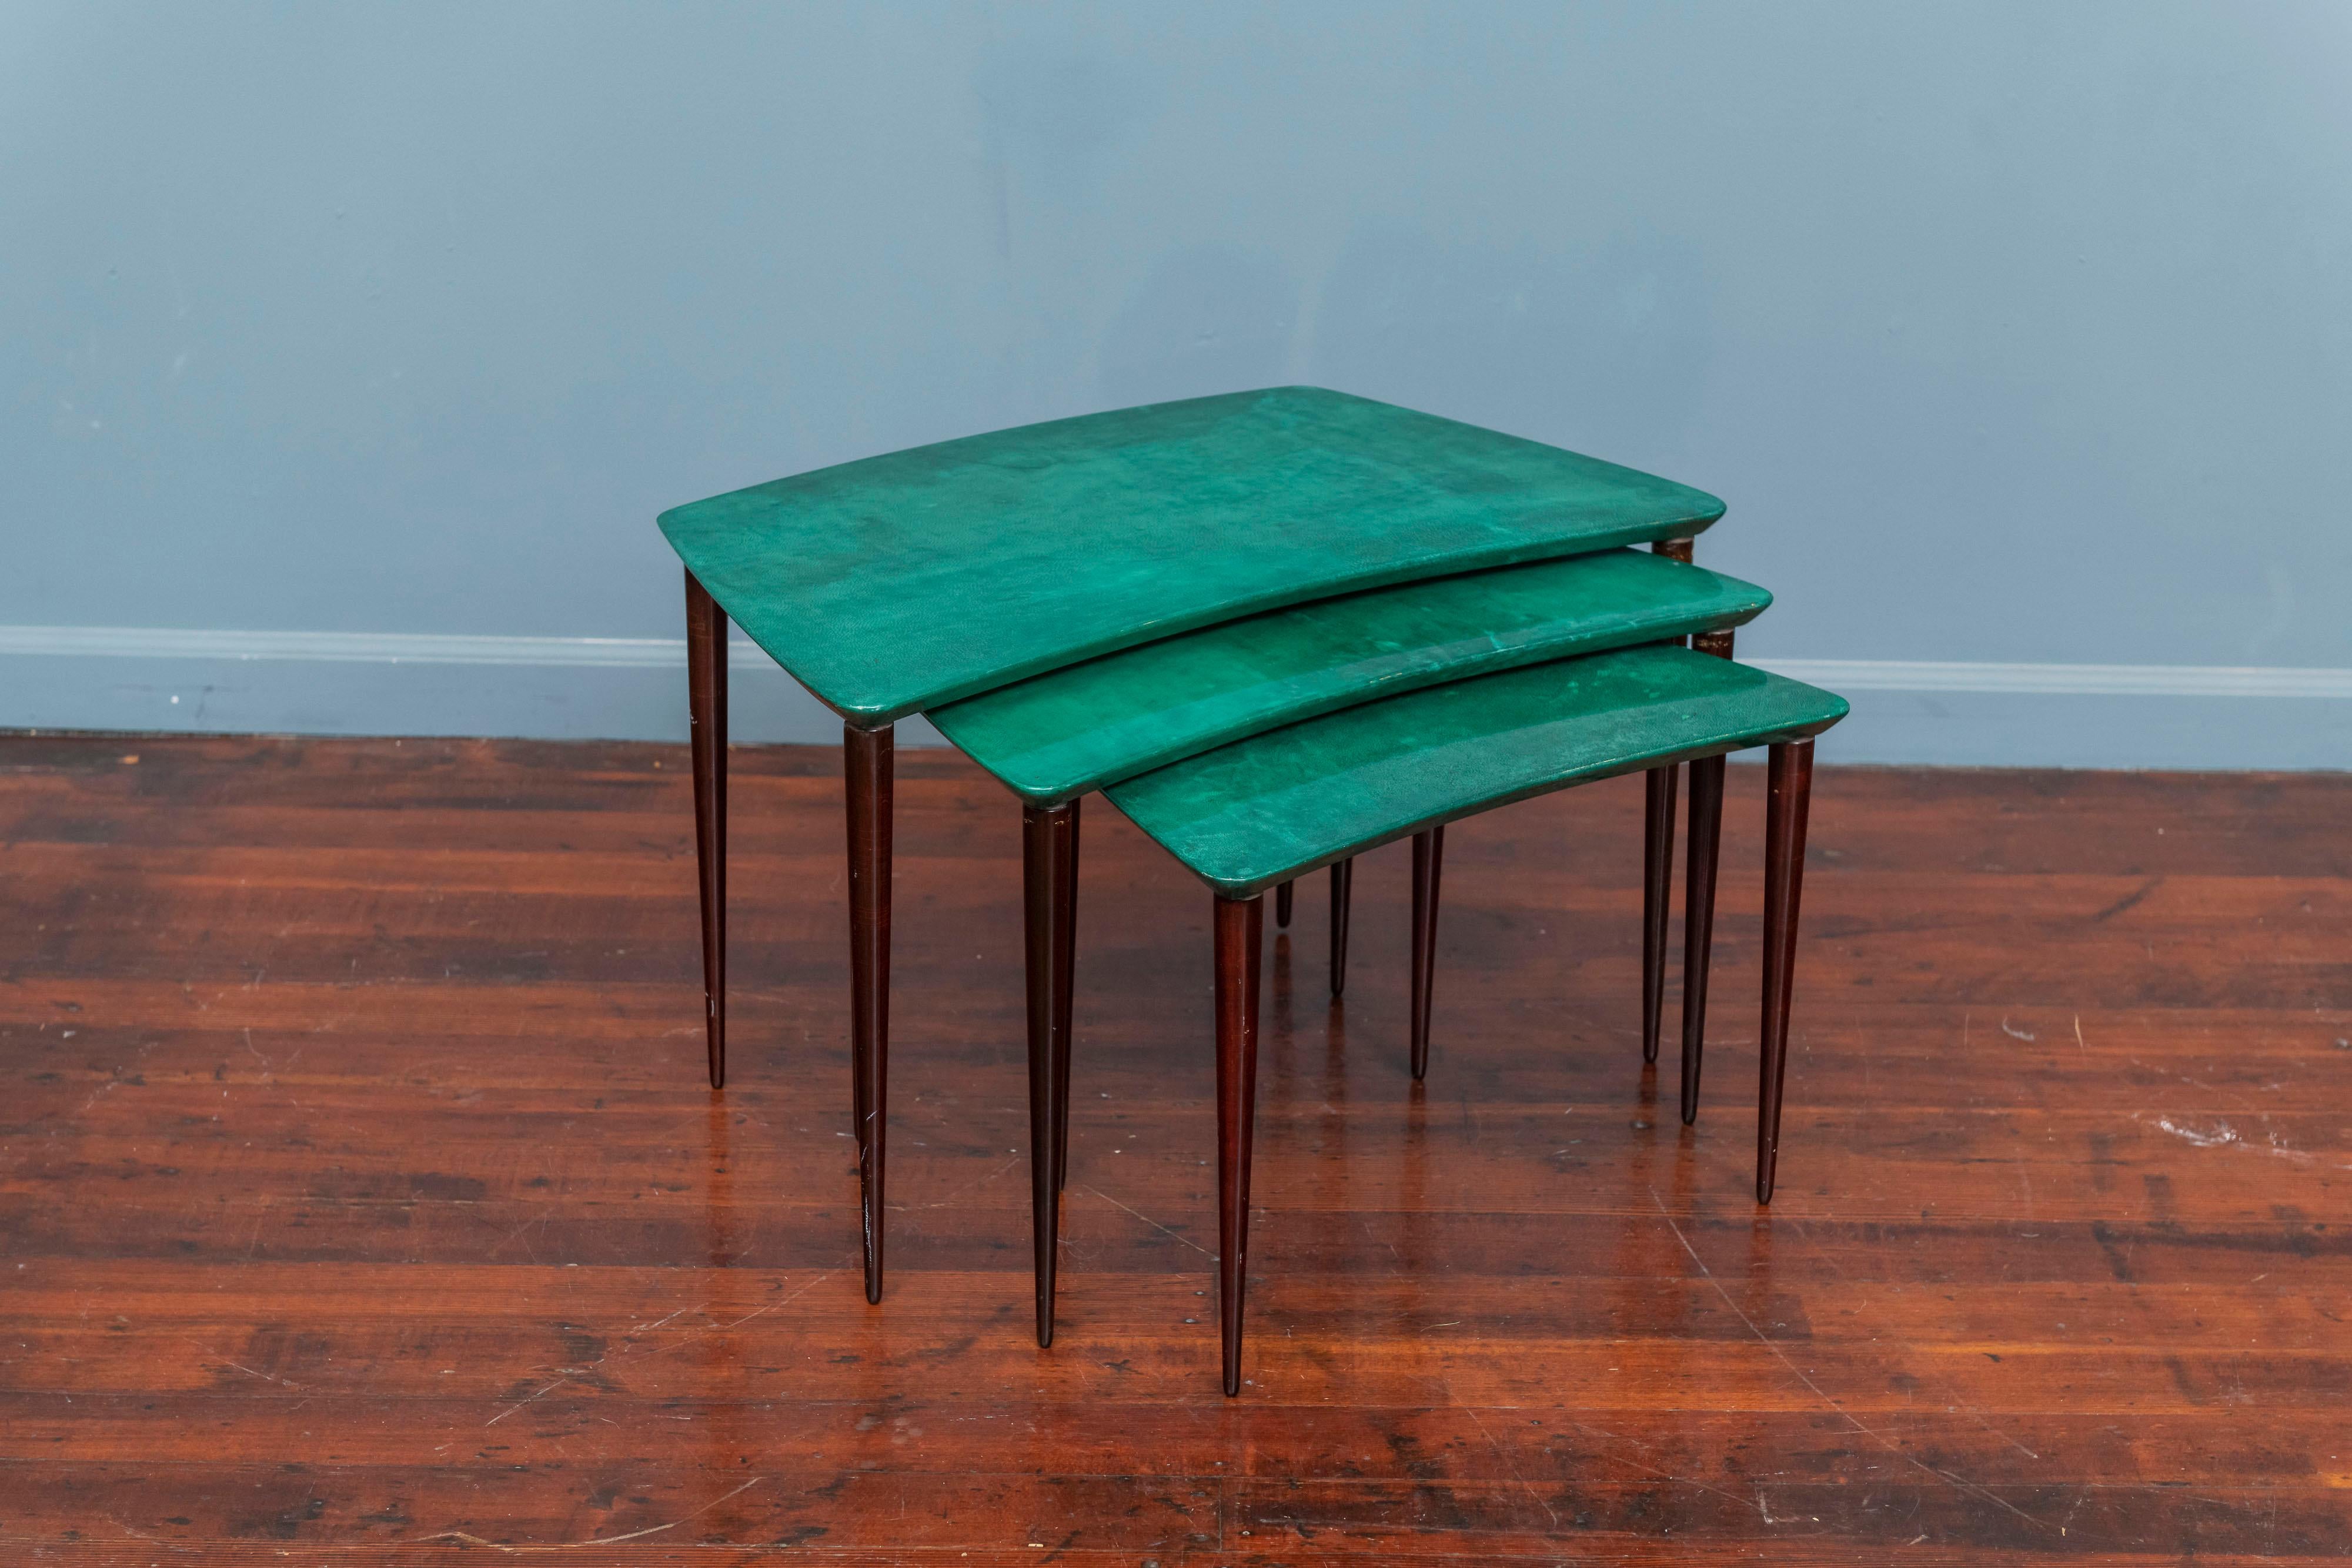 Set of three Aldo Tura nesting tables in lacquered goatskin and tanned pearwood legs. This particular set was executed in a rare malachite color, circa 1960 and is in great condition. Along with artists like Piero Fornasetti and Carlo Bugatti, Aldo